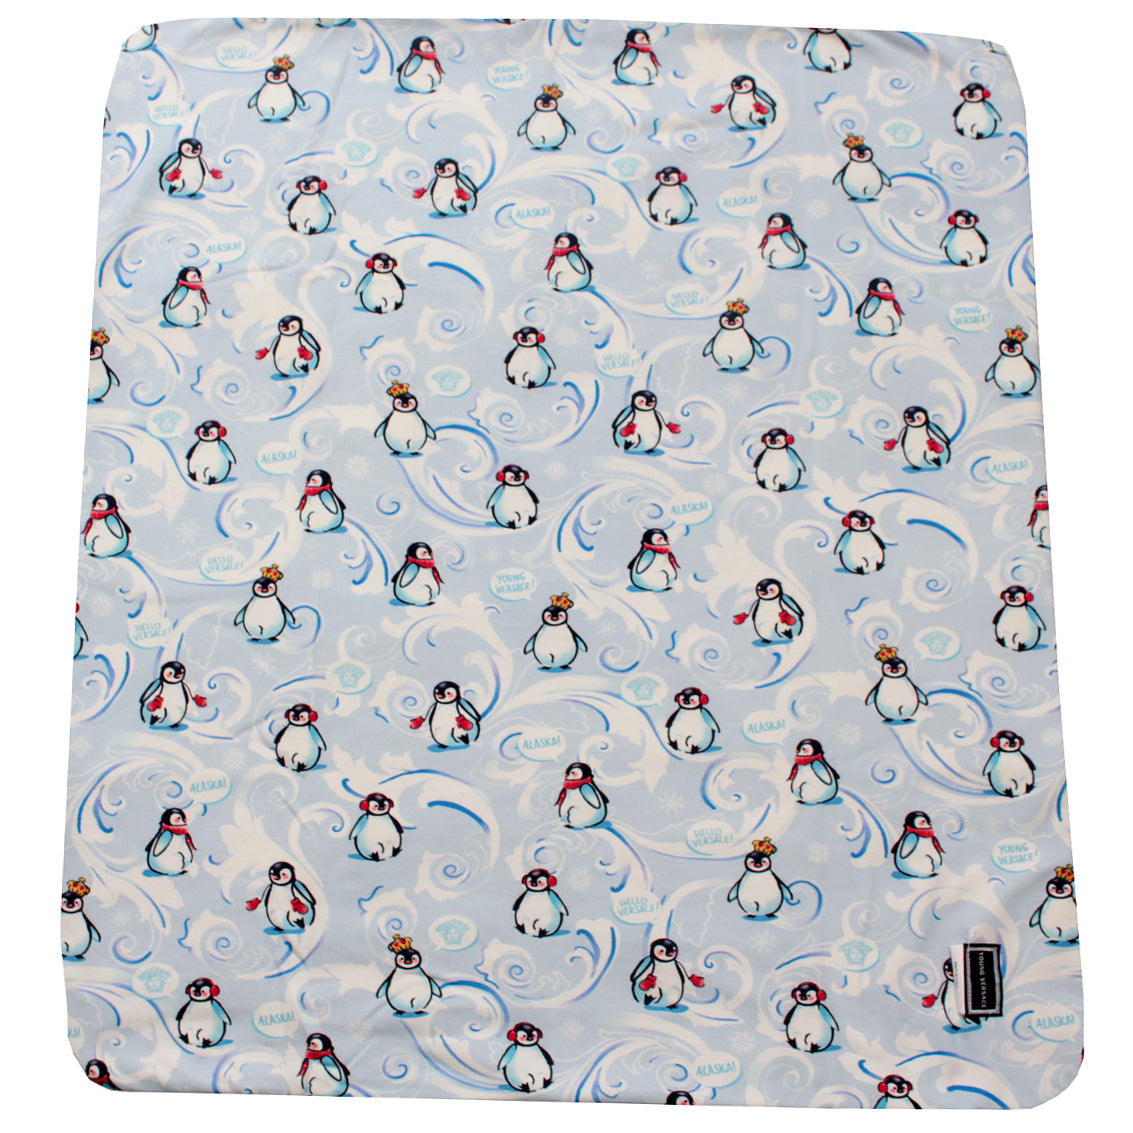 Baby Pinguin Print and Medusa logo embroidered Blanket-White and Blue